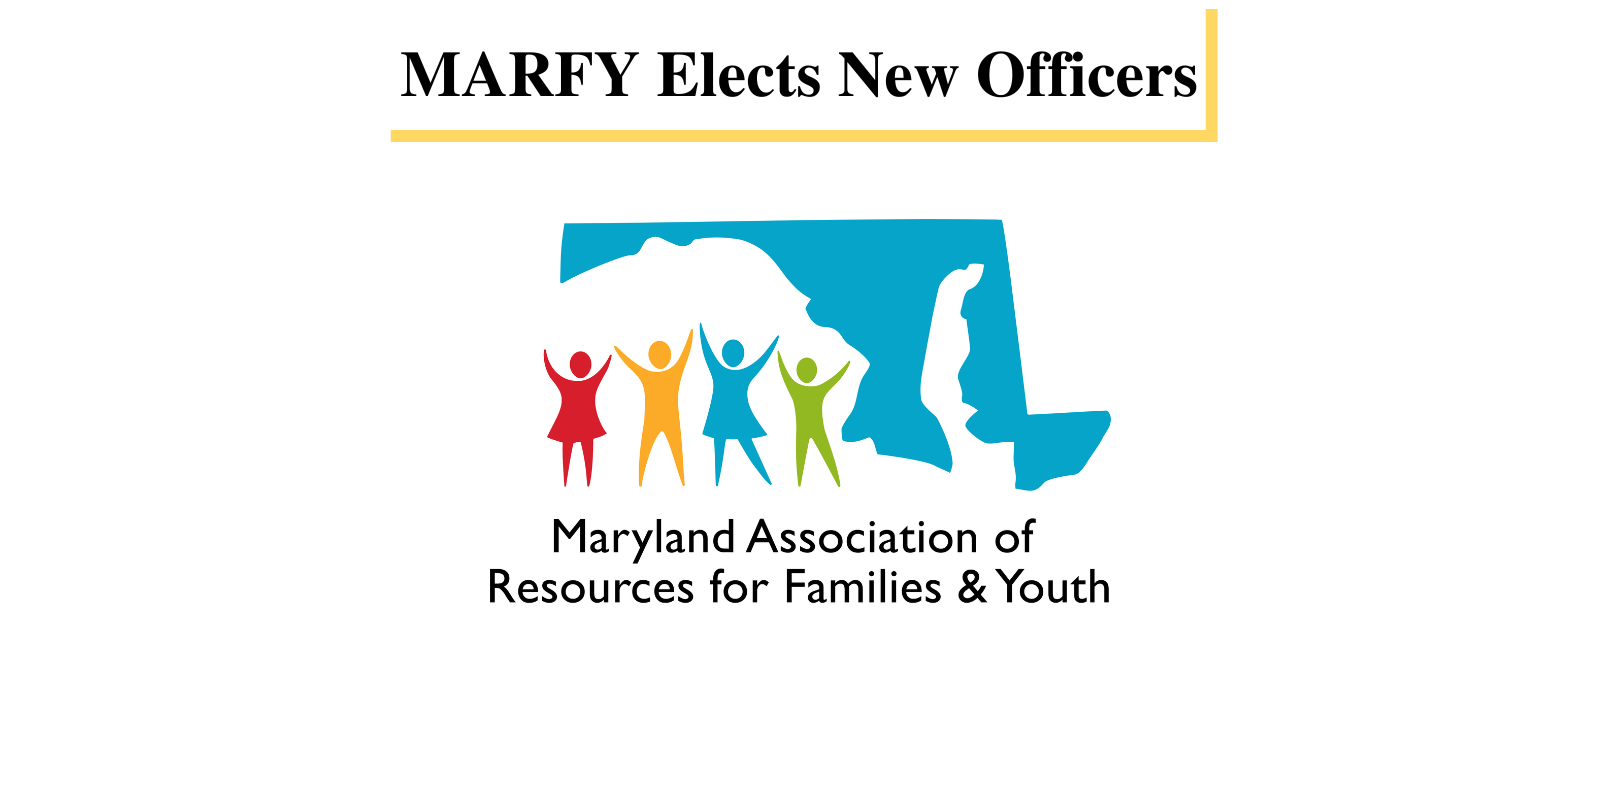 MARFY elects new officers